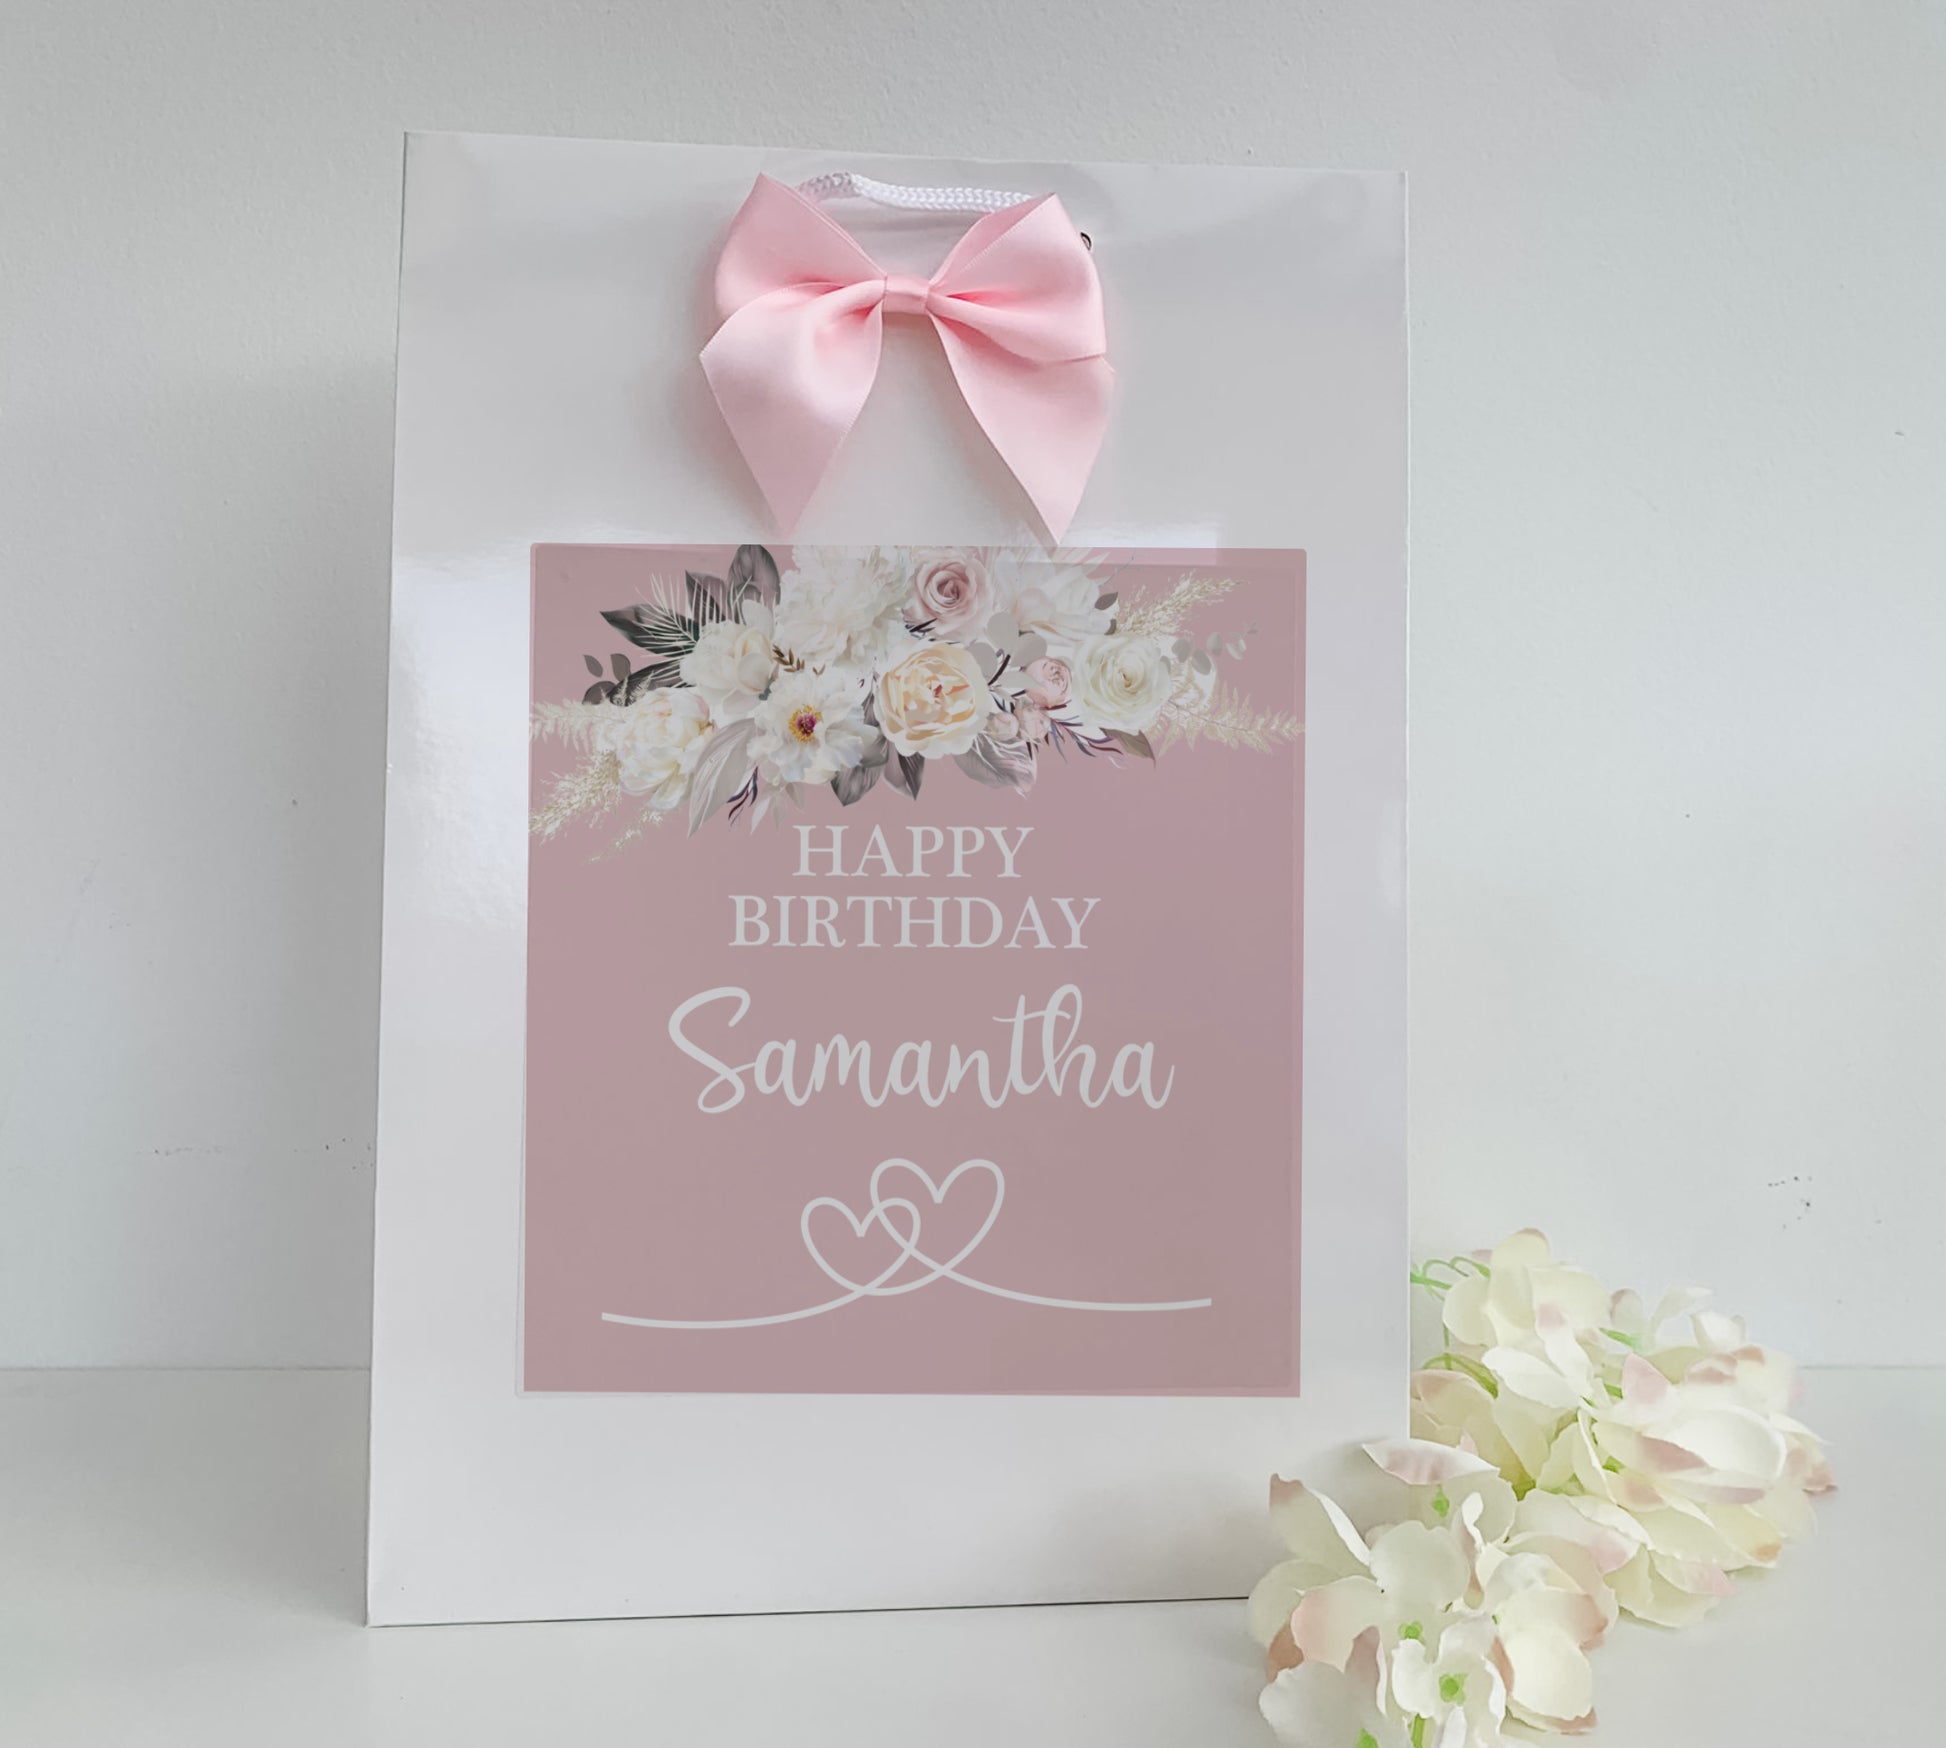 a pink birthday card with a pink bow on it